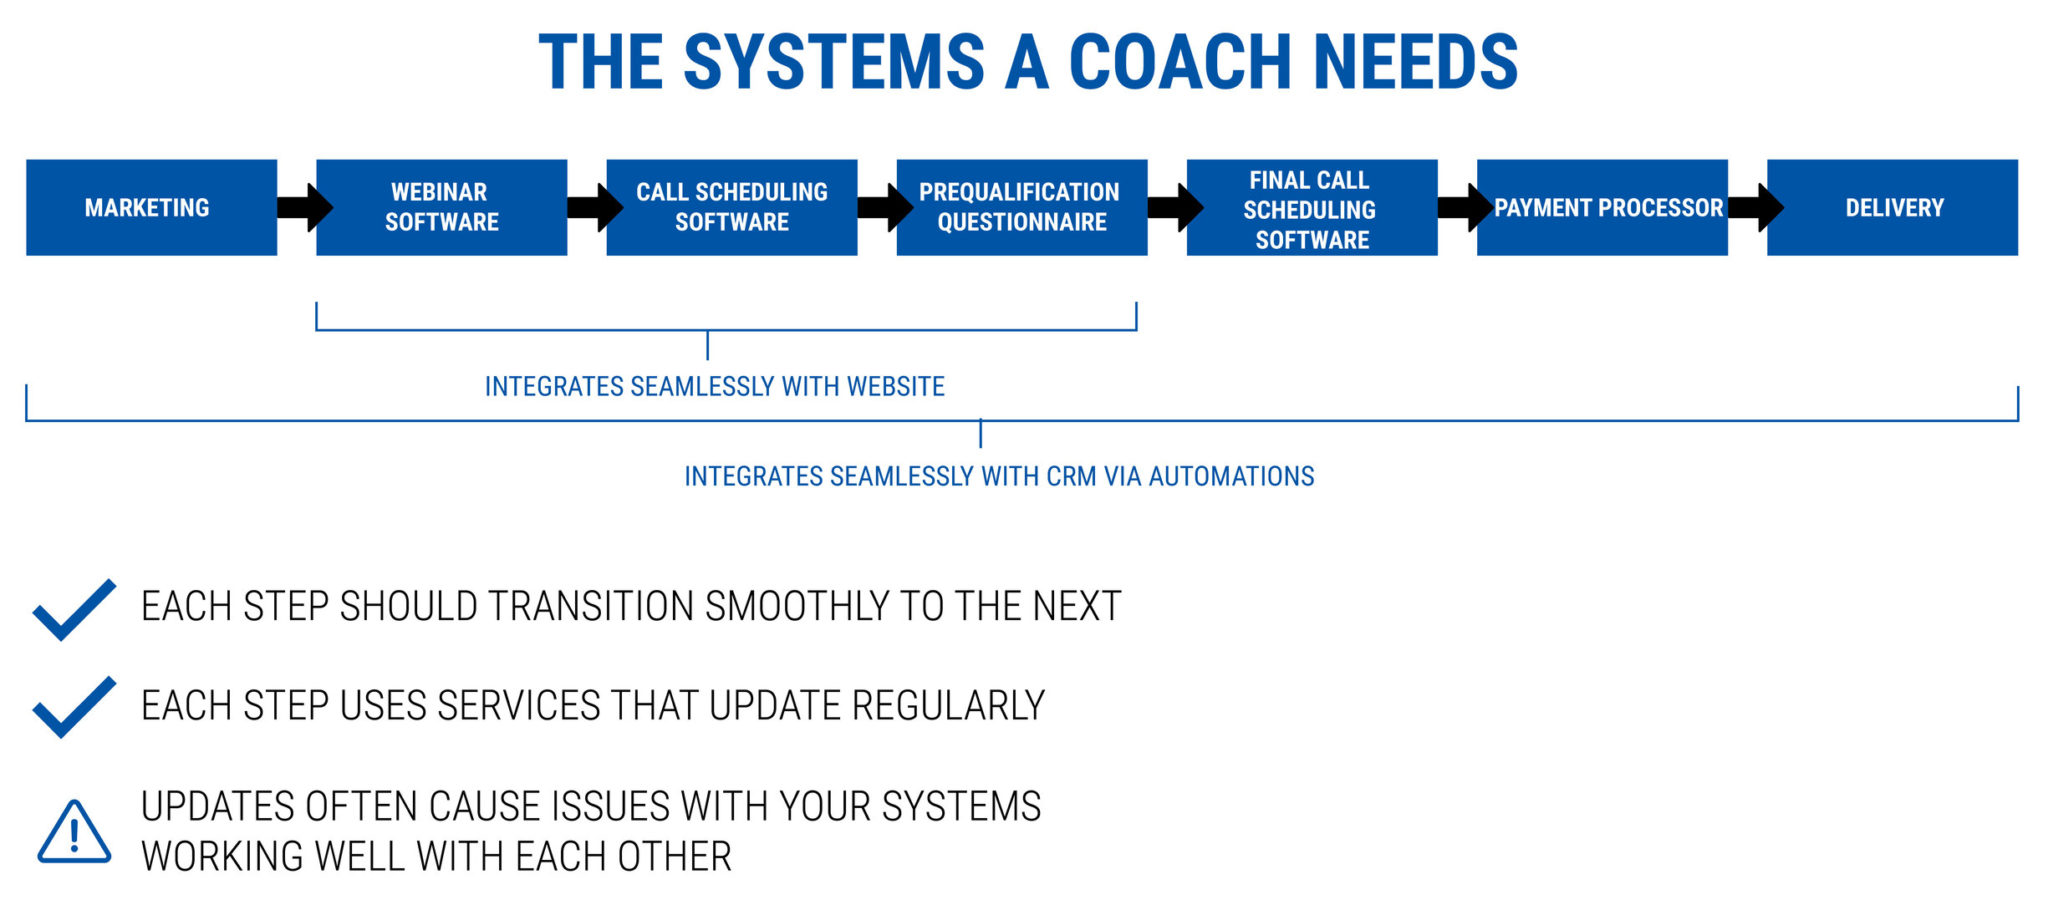 the systems a coach needs - starting a coaching business while working full-time